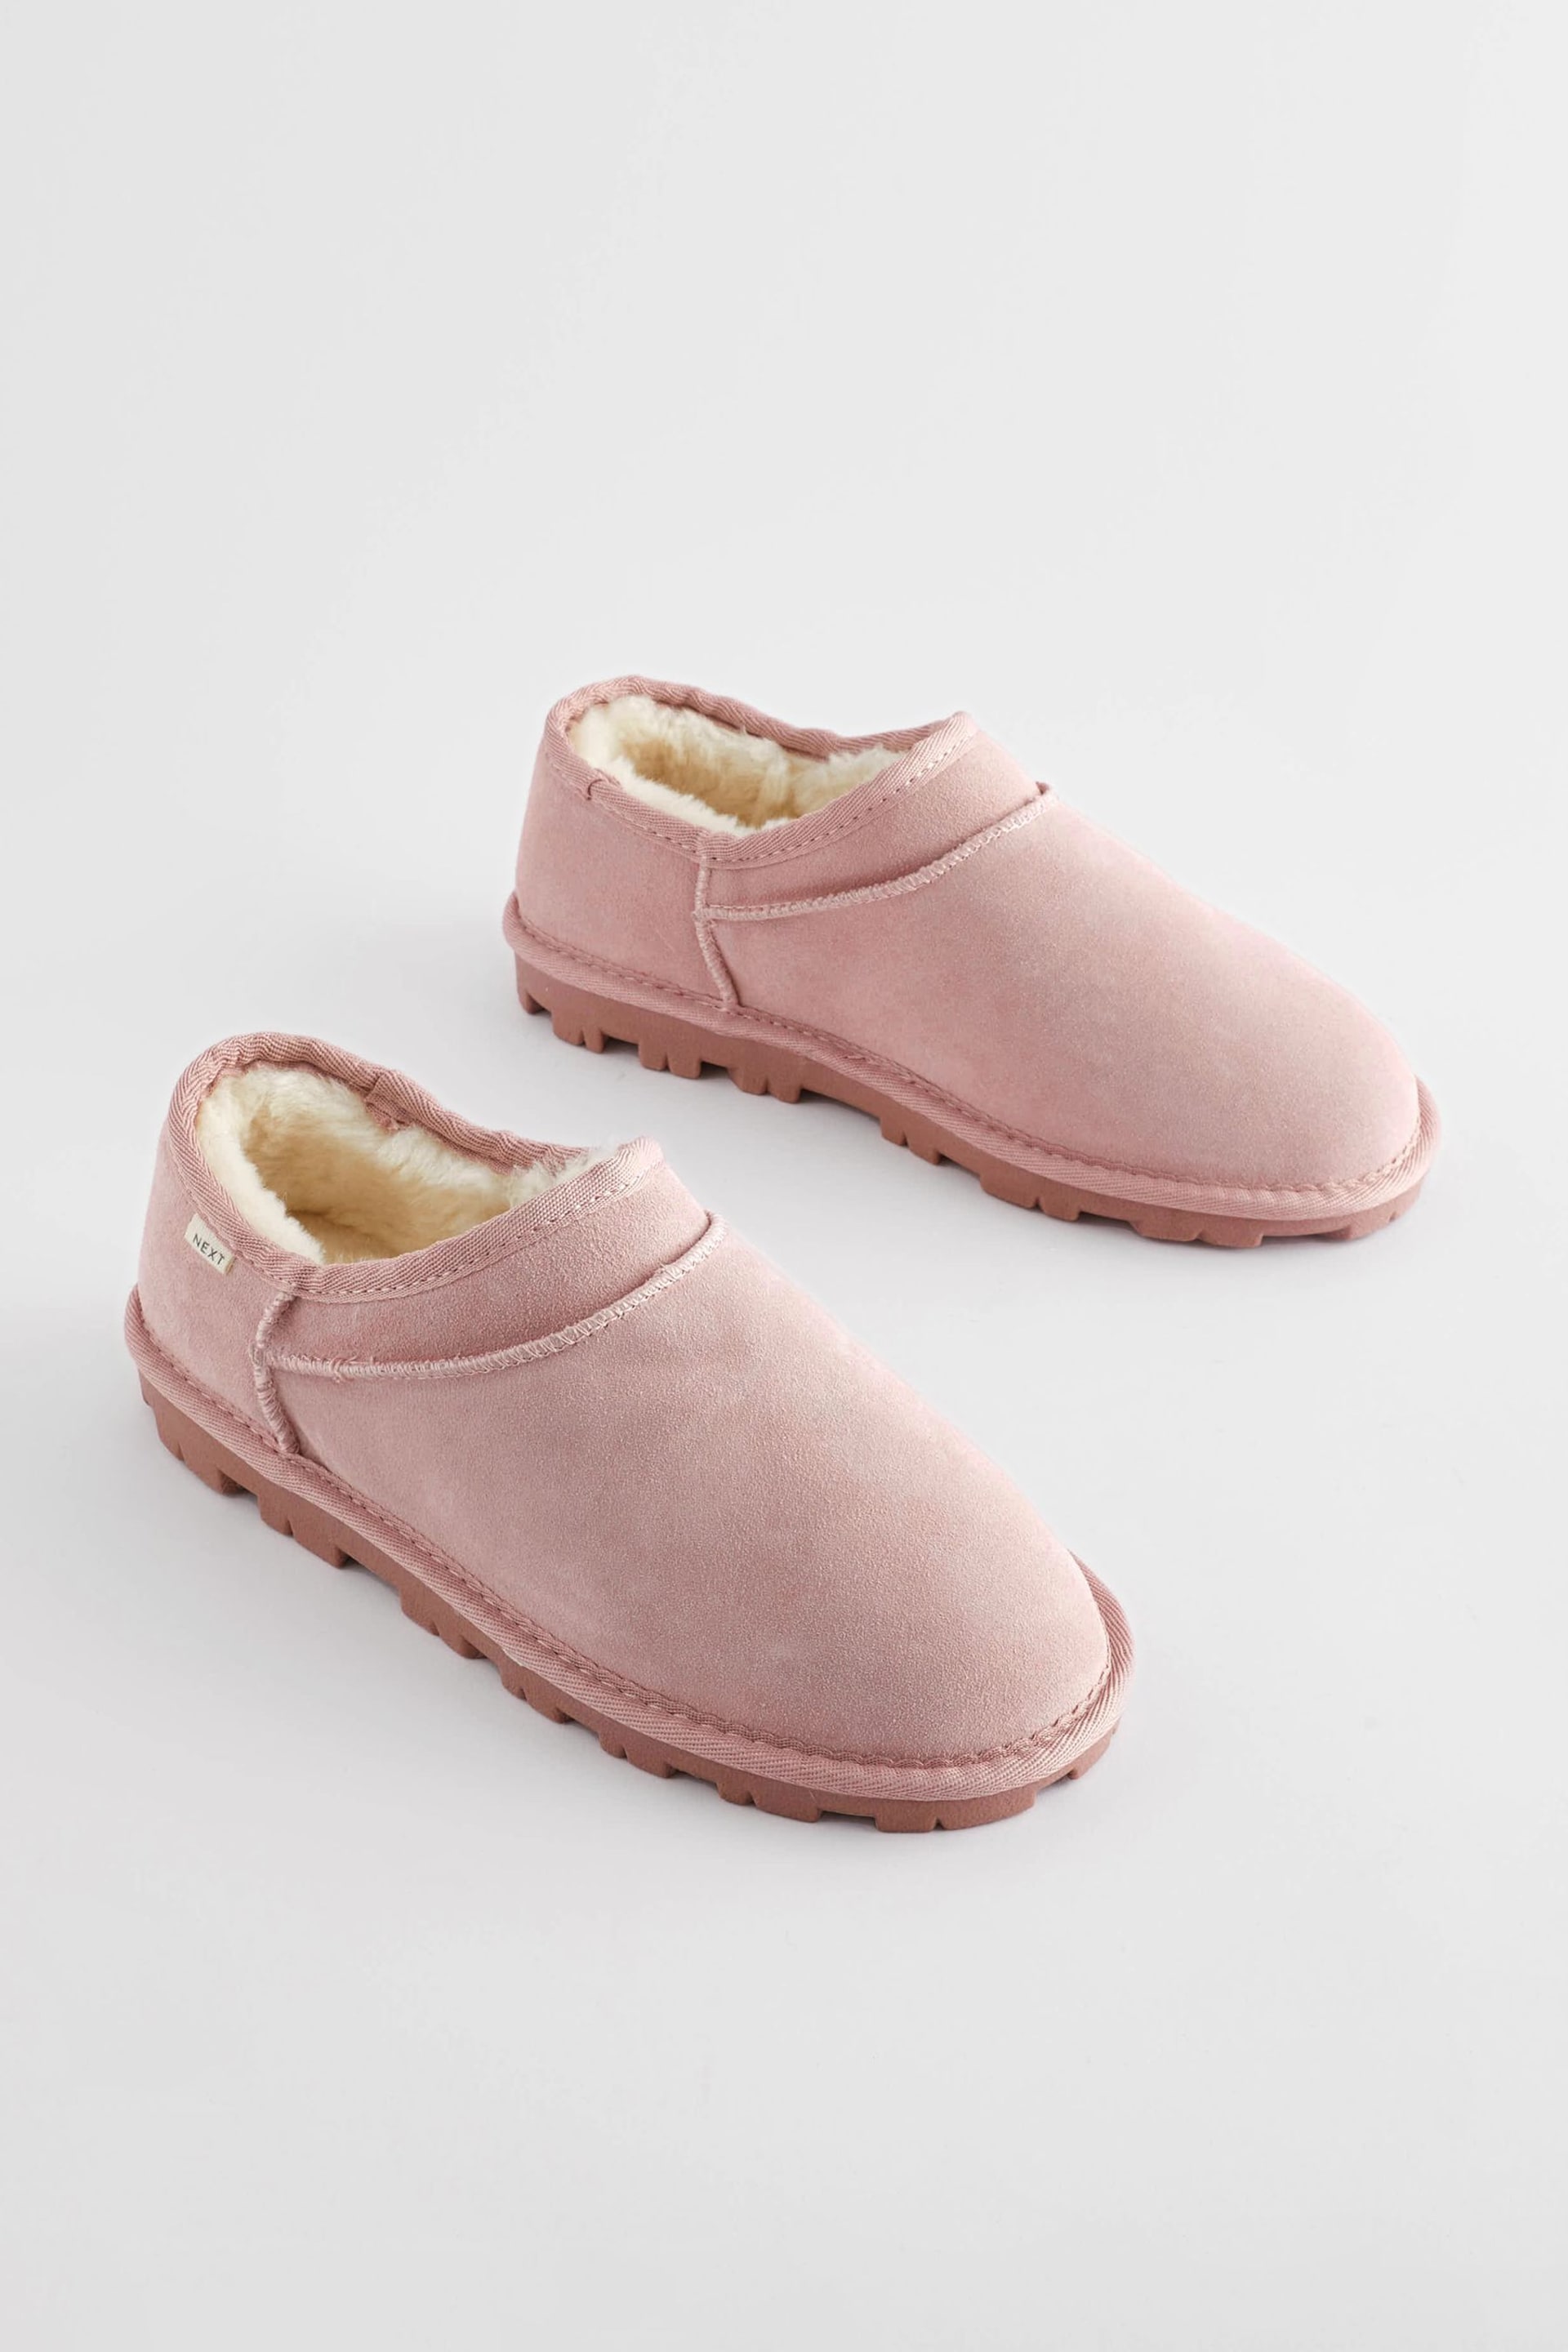 Pink Suede Shoot Slippers - Image 3 of 8